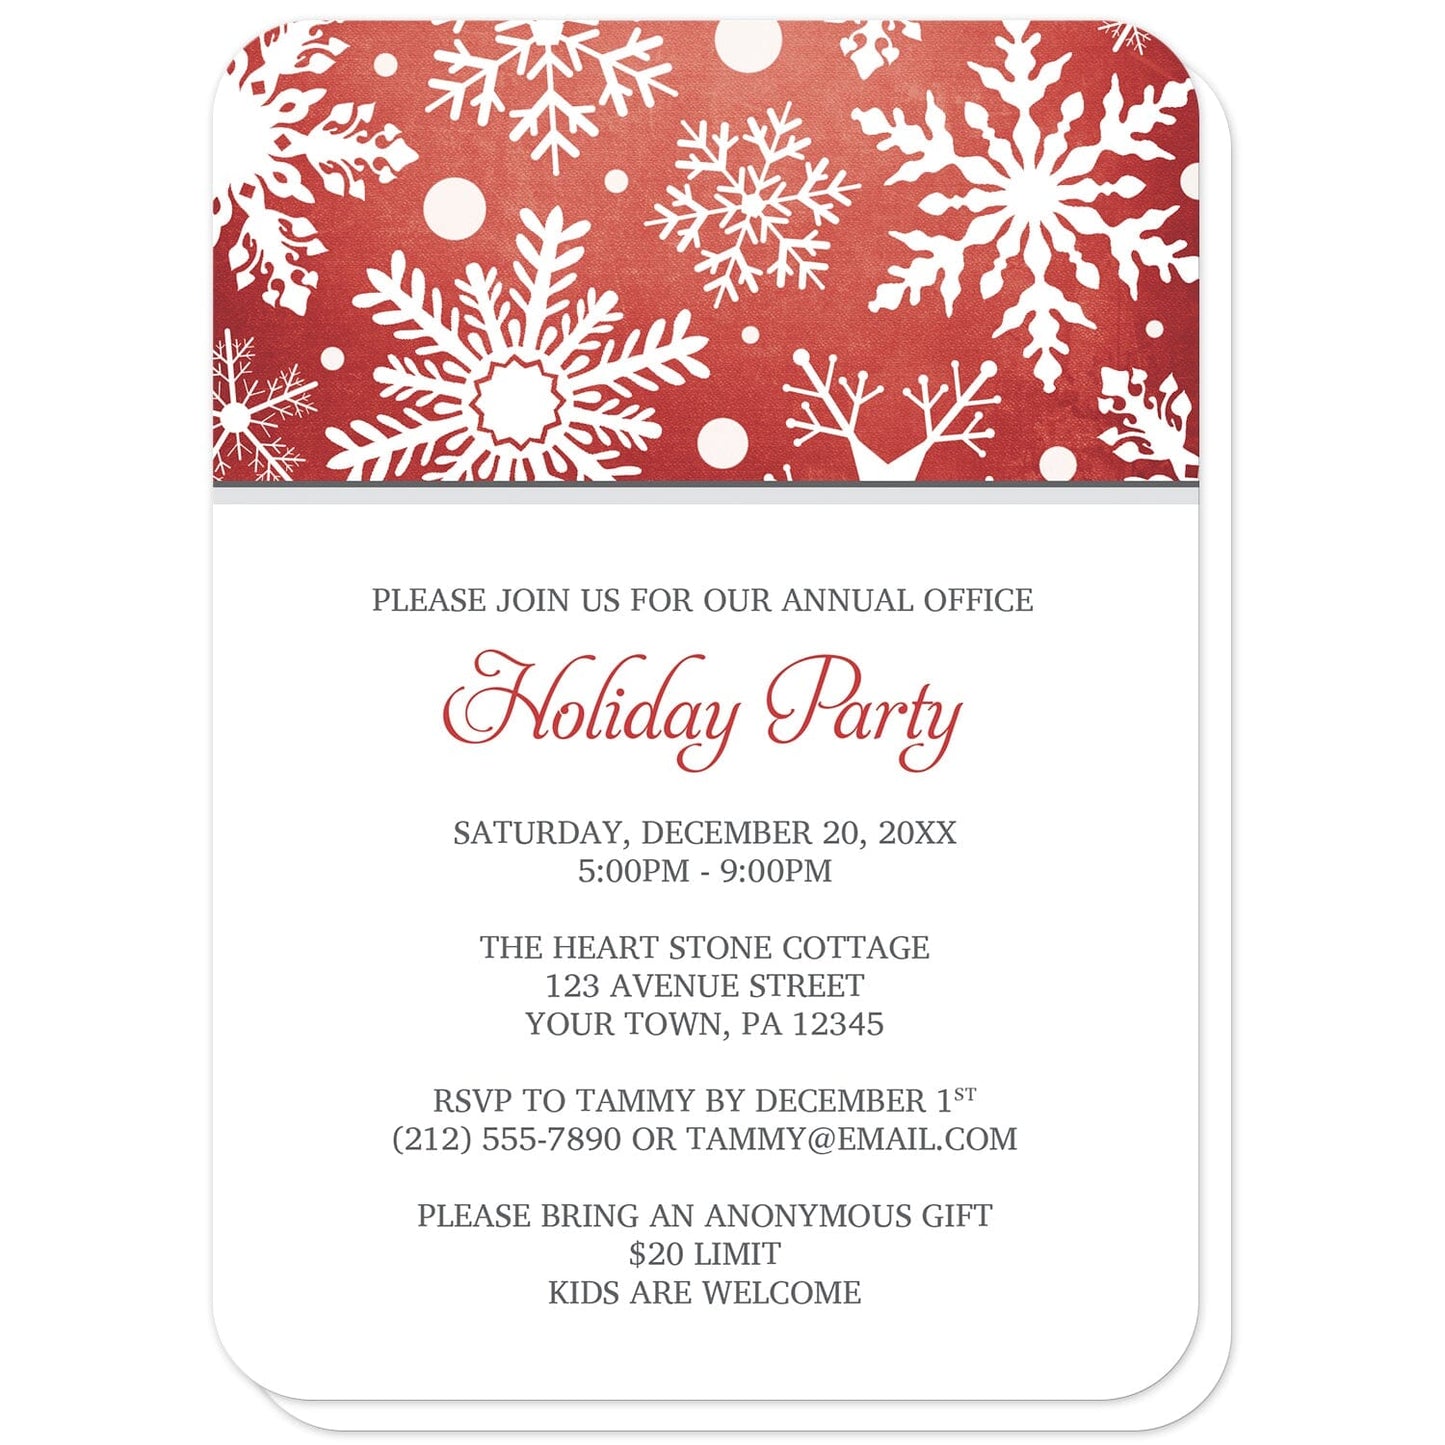 Winter Snowflake Red Gray Holiday Party Invitations (with rounded corners) at Artistically Invited. Modern winter snowflake red gray holiday party invitations designed with a white snowflakes pattern over an organic red wintry background at the top of the invitations. Your personalized holiday celebration details are custom printed in red and gray on white below the snowflakes. 